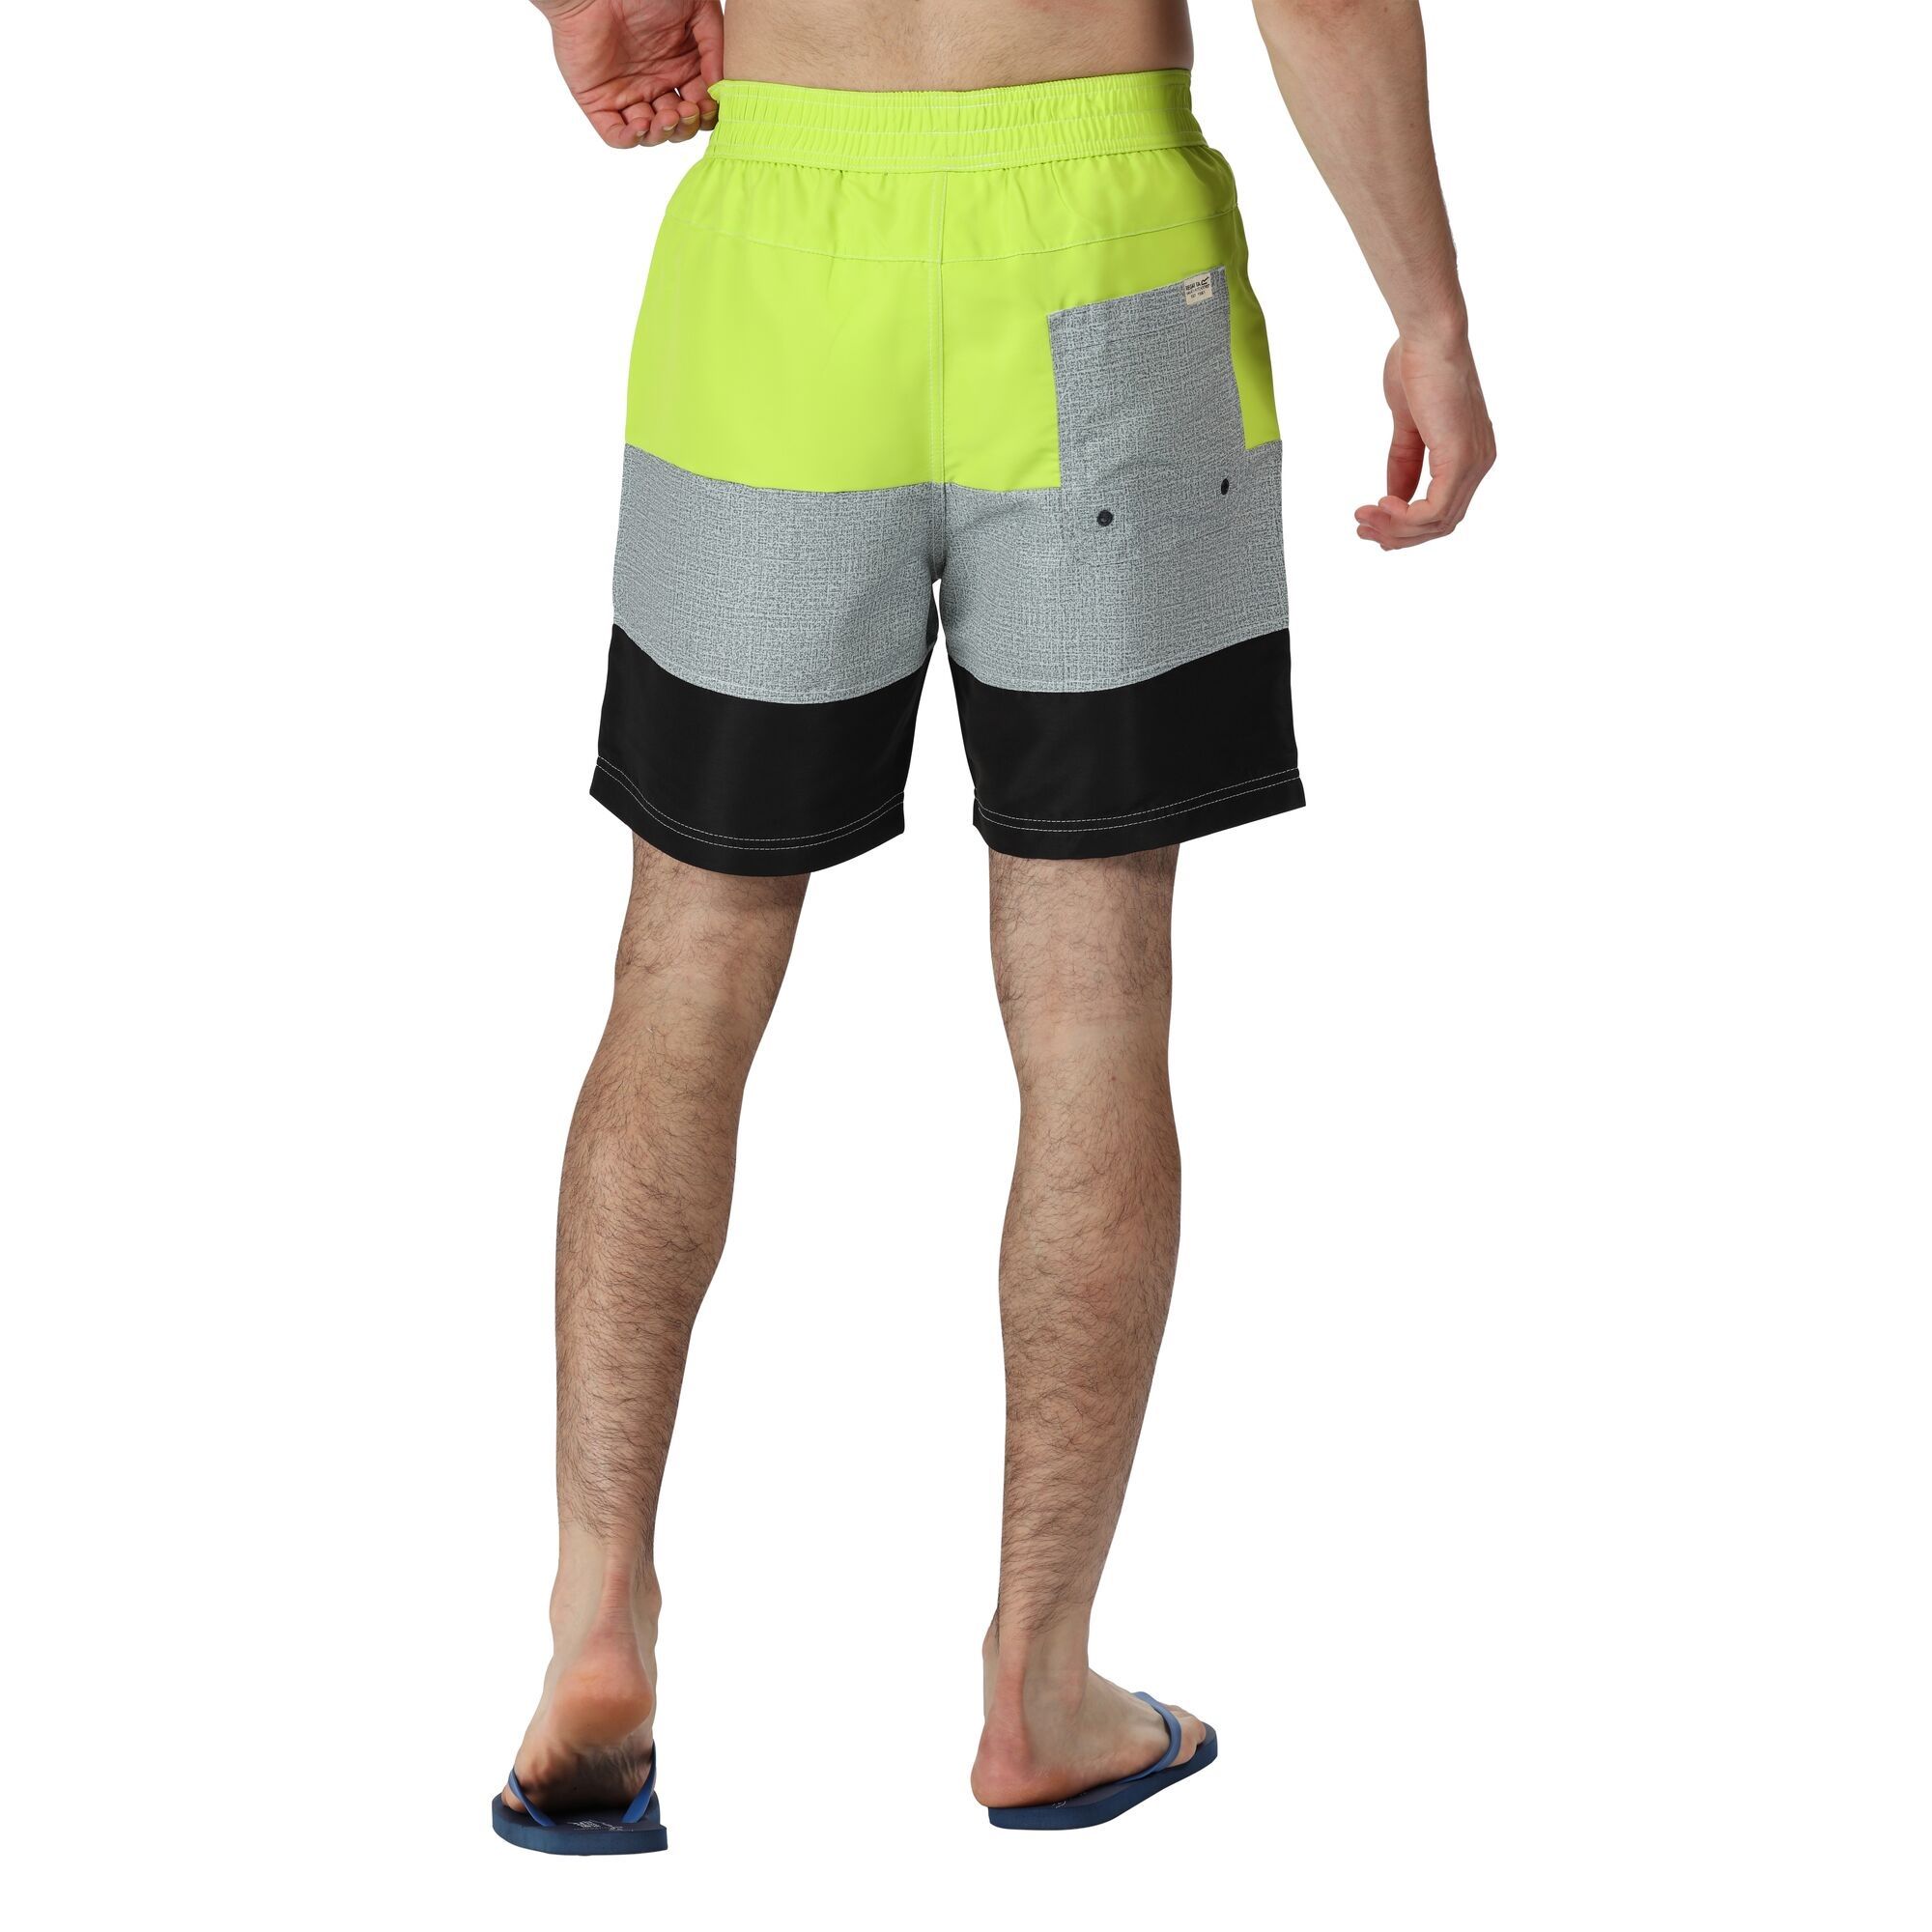 Material: 100% polyester taslan fabric. Quick drying fabric. Adjustable drawcord waist. 2 side pockets. 1 back pocket. Mesh brief liner with security pocket.